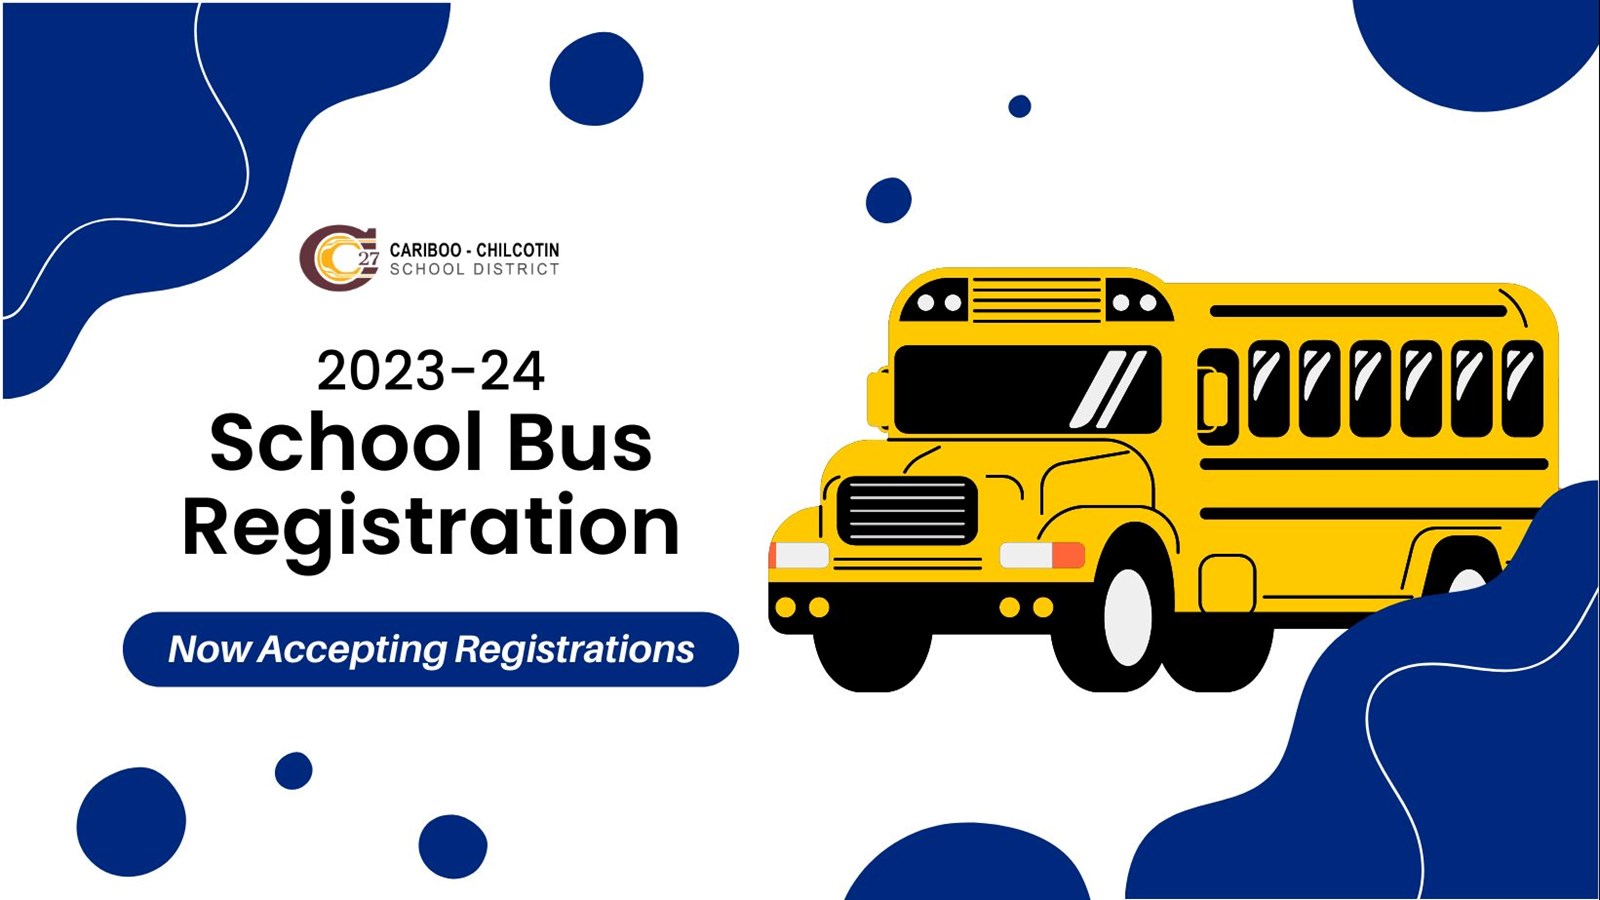 Now accepting school bus registration for 2023-24